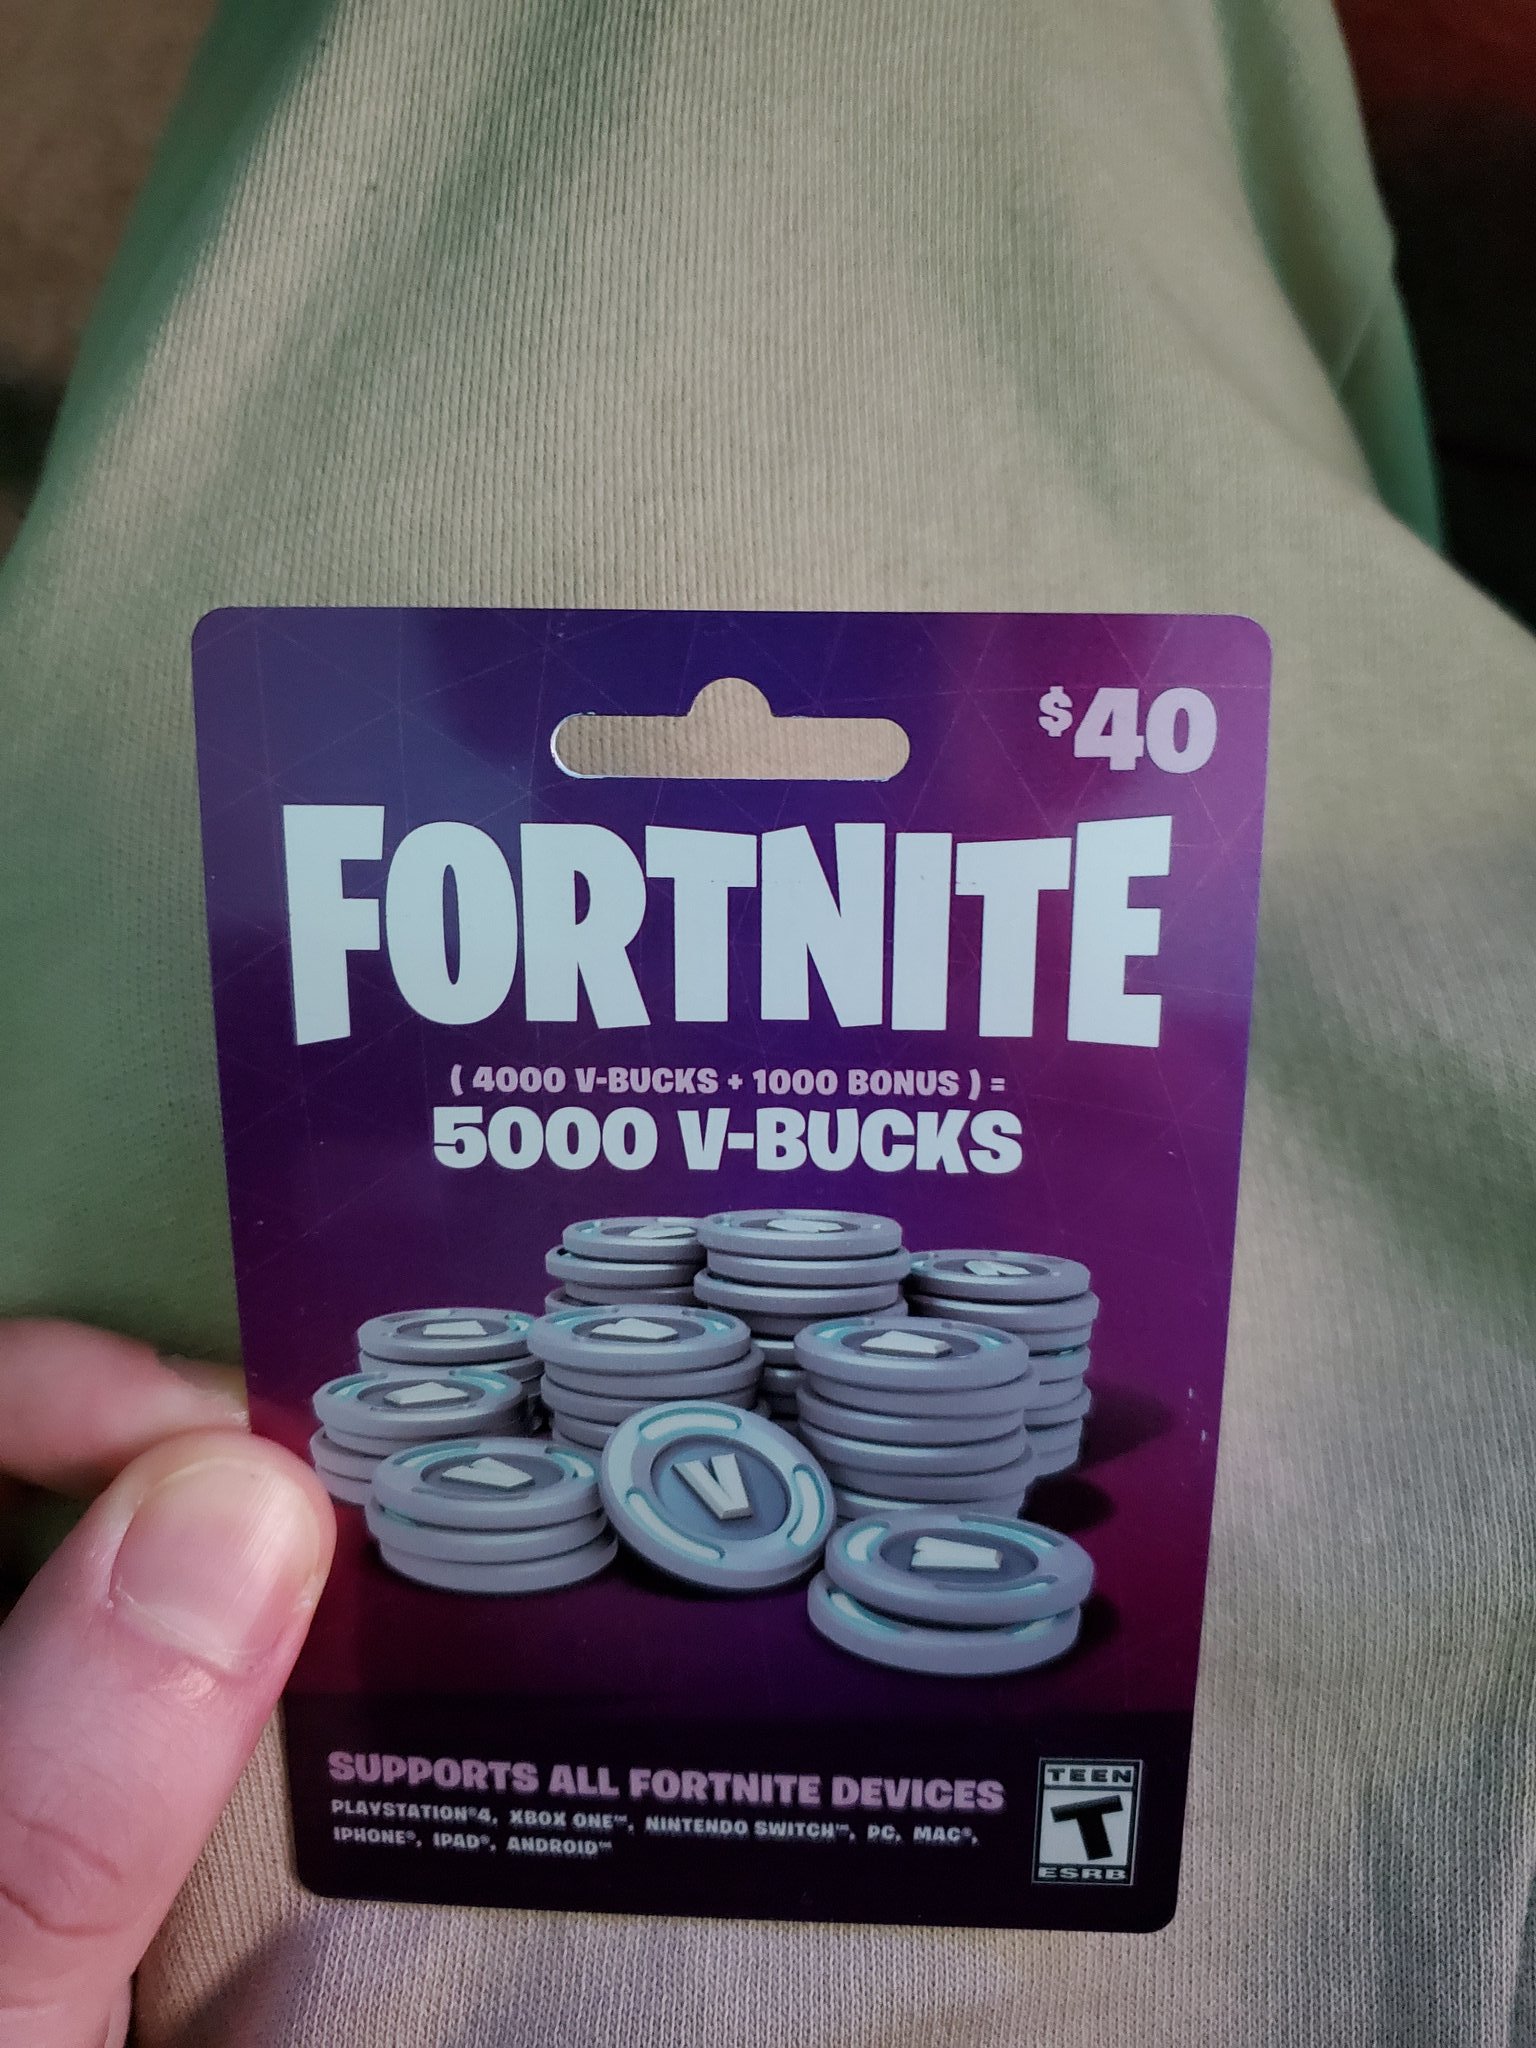 Homeofgames Hi There Gamestop Was Totally Sold Out Of 1 000 V Buck Cards So I Had To Get The 5 000 V Buck Cards Instead Hope That S Okay Drop A Like In 5